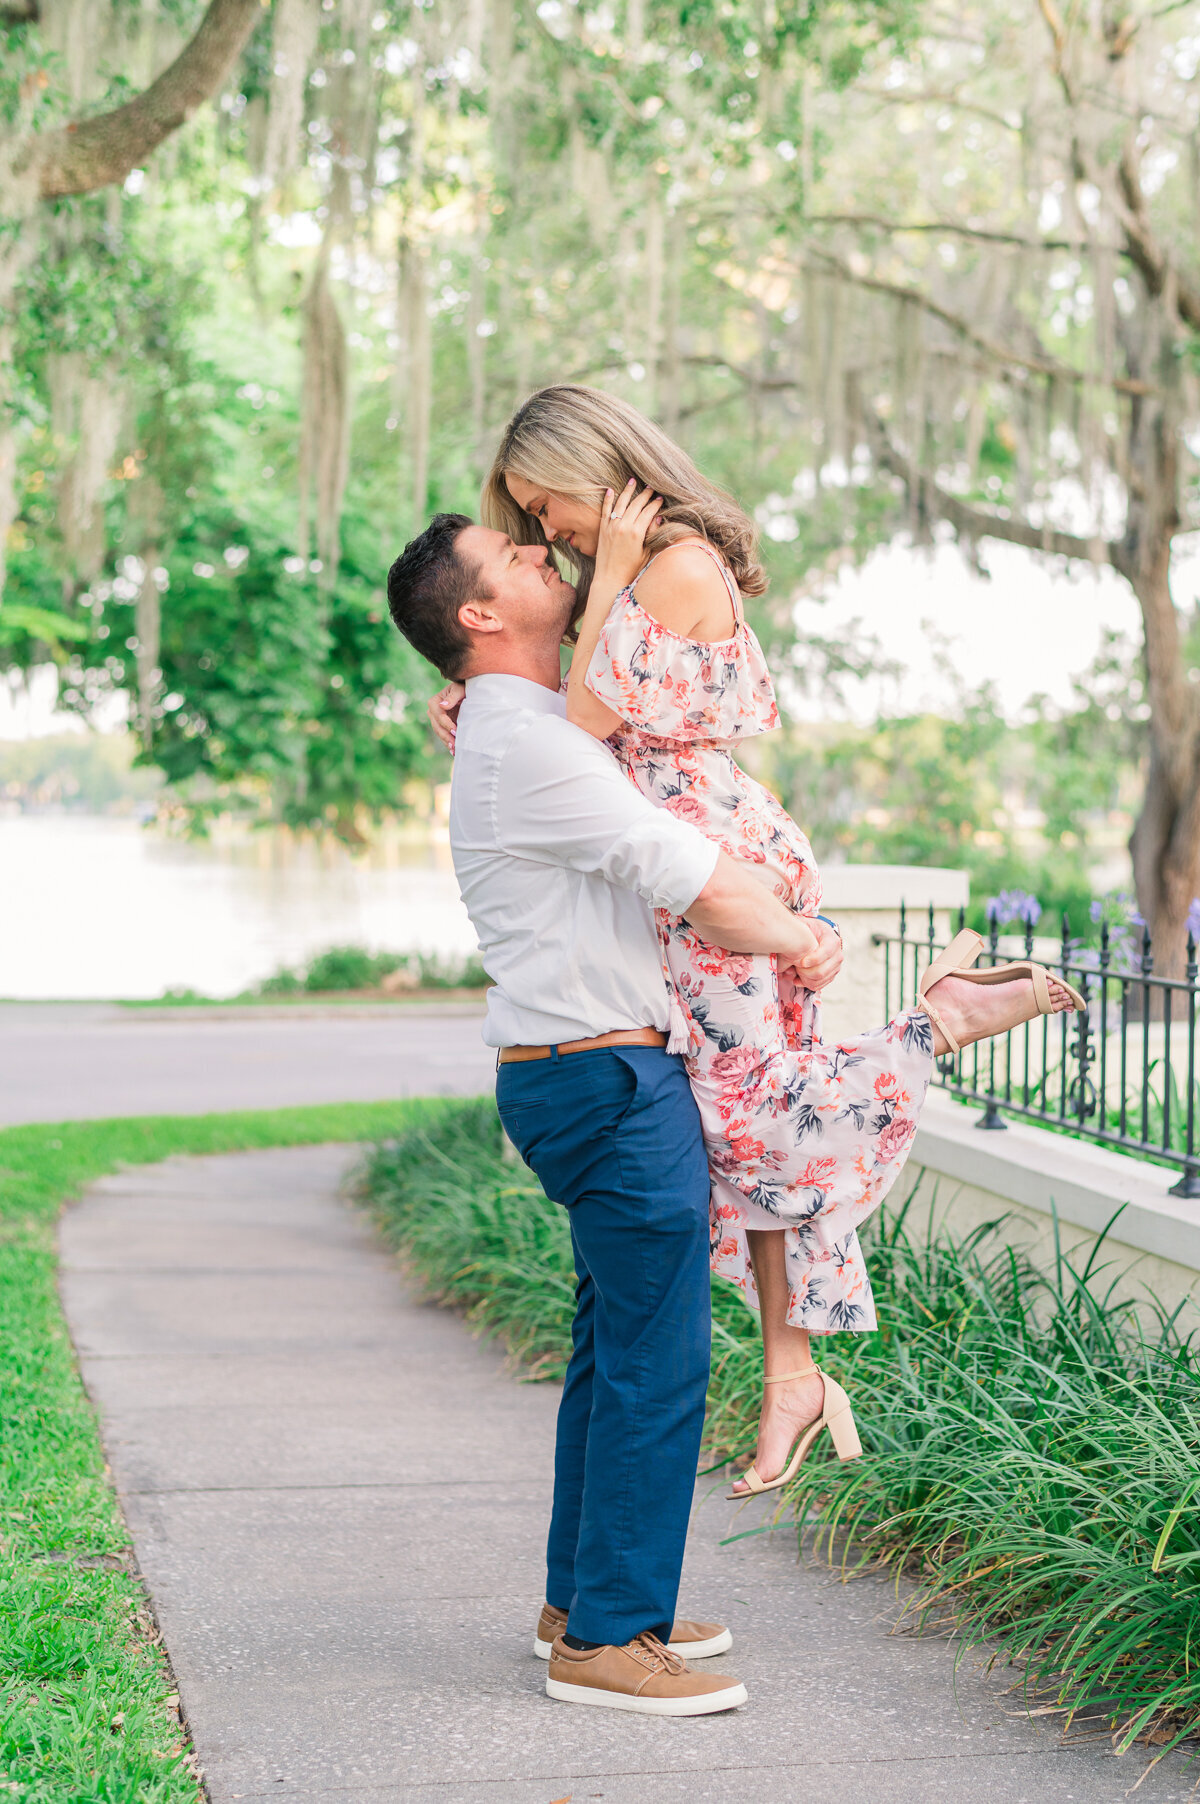 Nicky & Donny | Rollins College Engagement | Lisa Marshall Photography-18